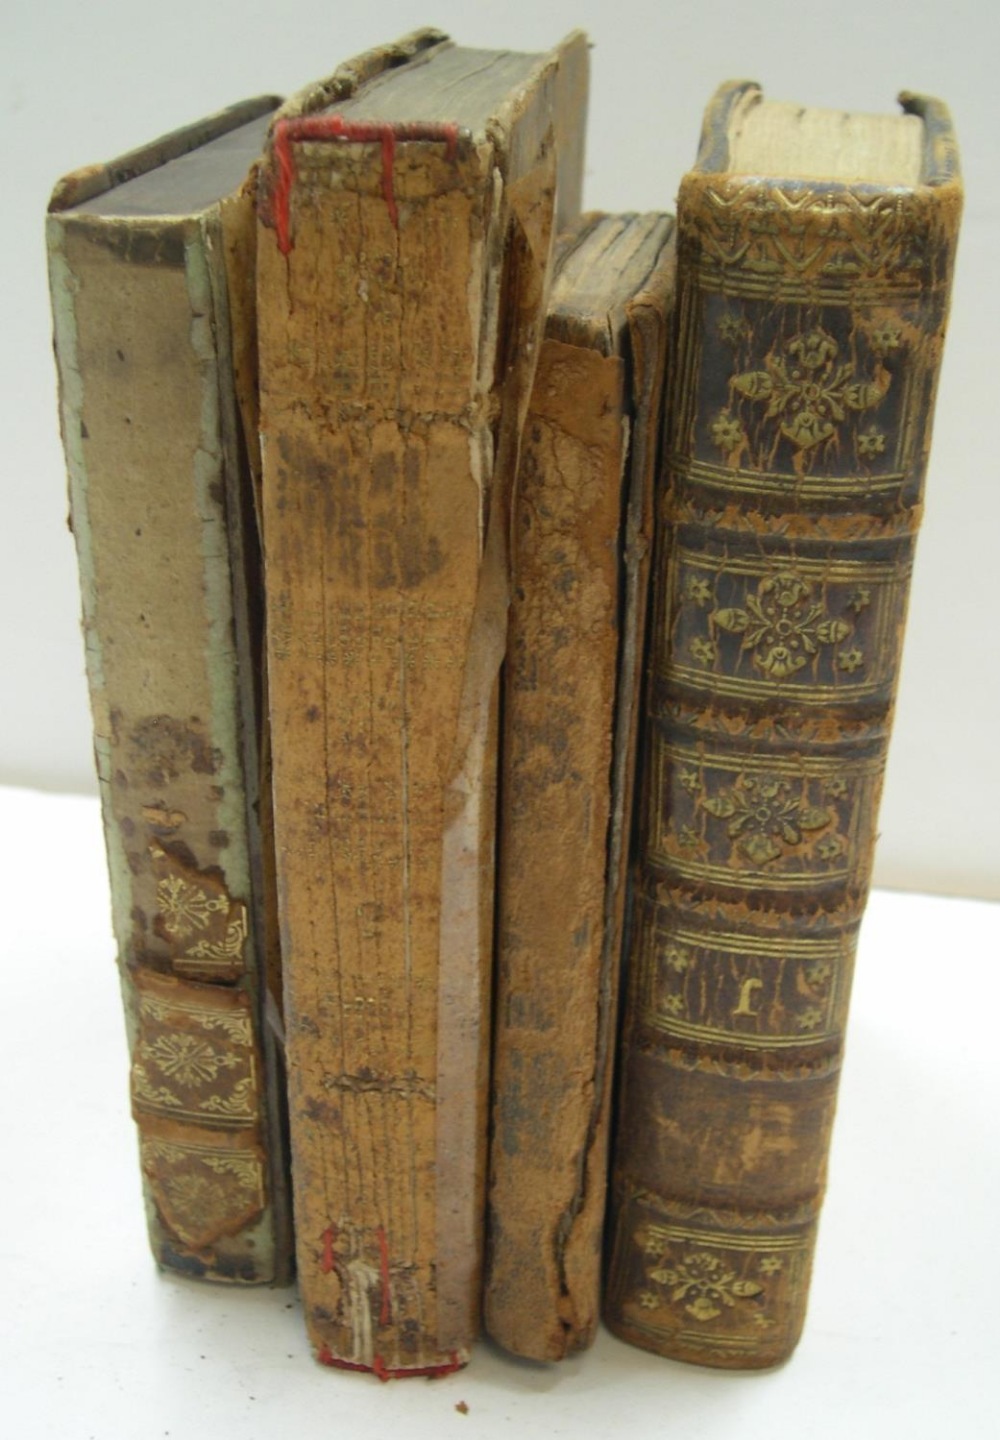 4 Georgian books by differing authors. "The works of George Farquar" 1742 "The history of Charles